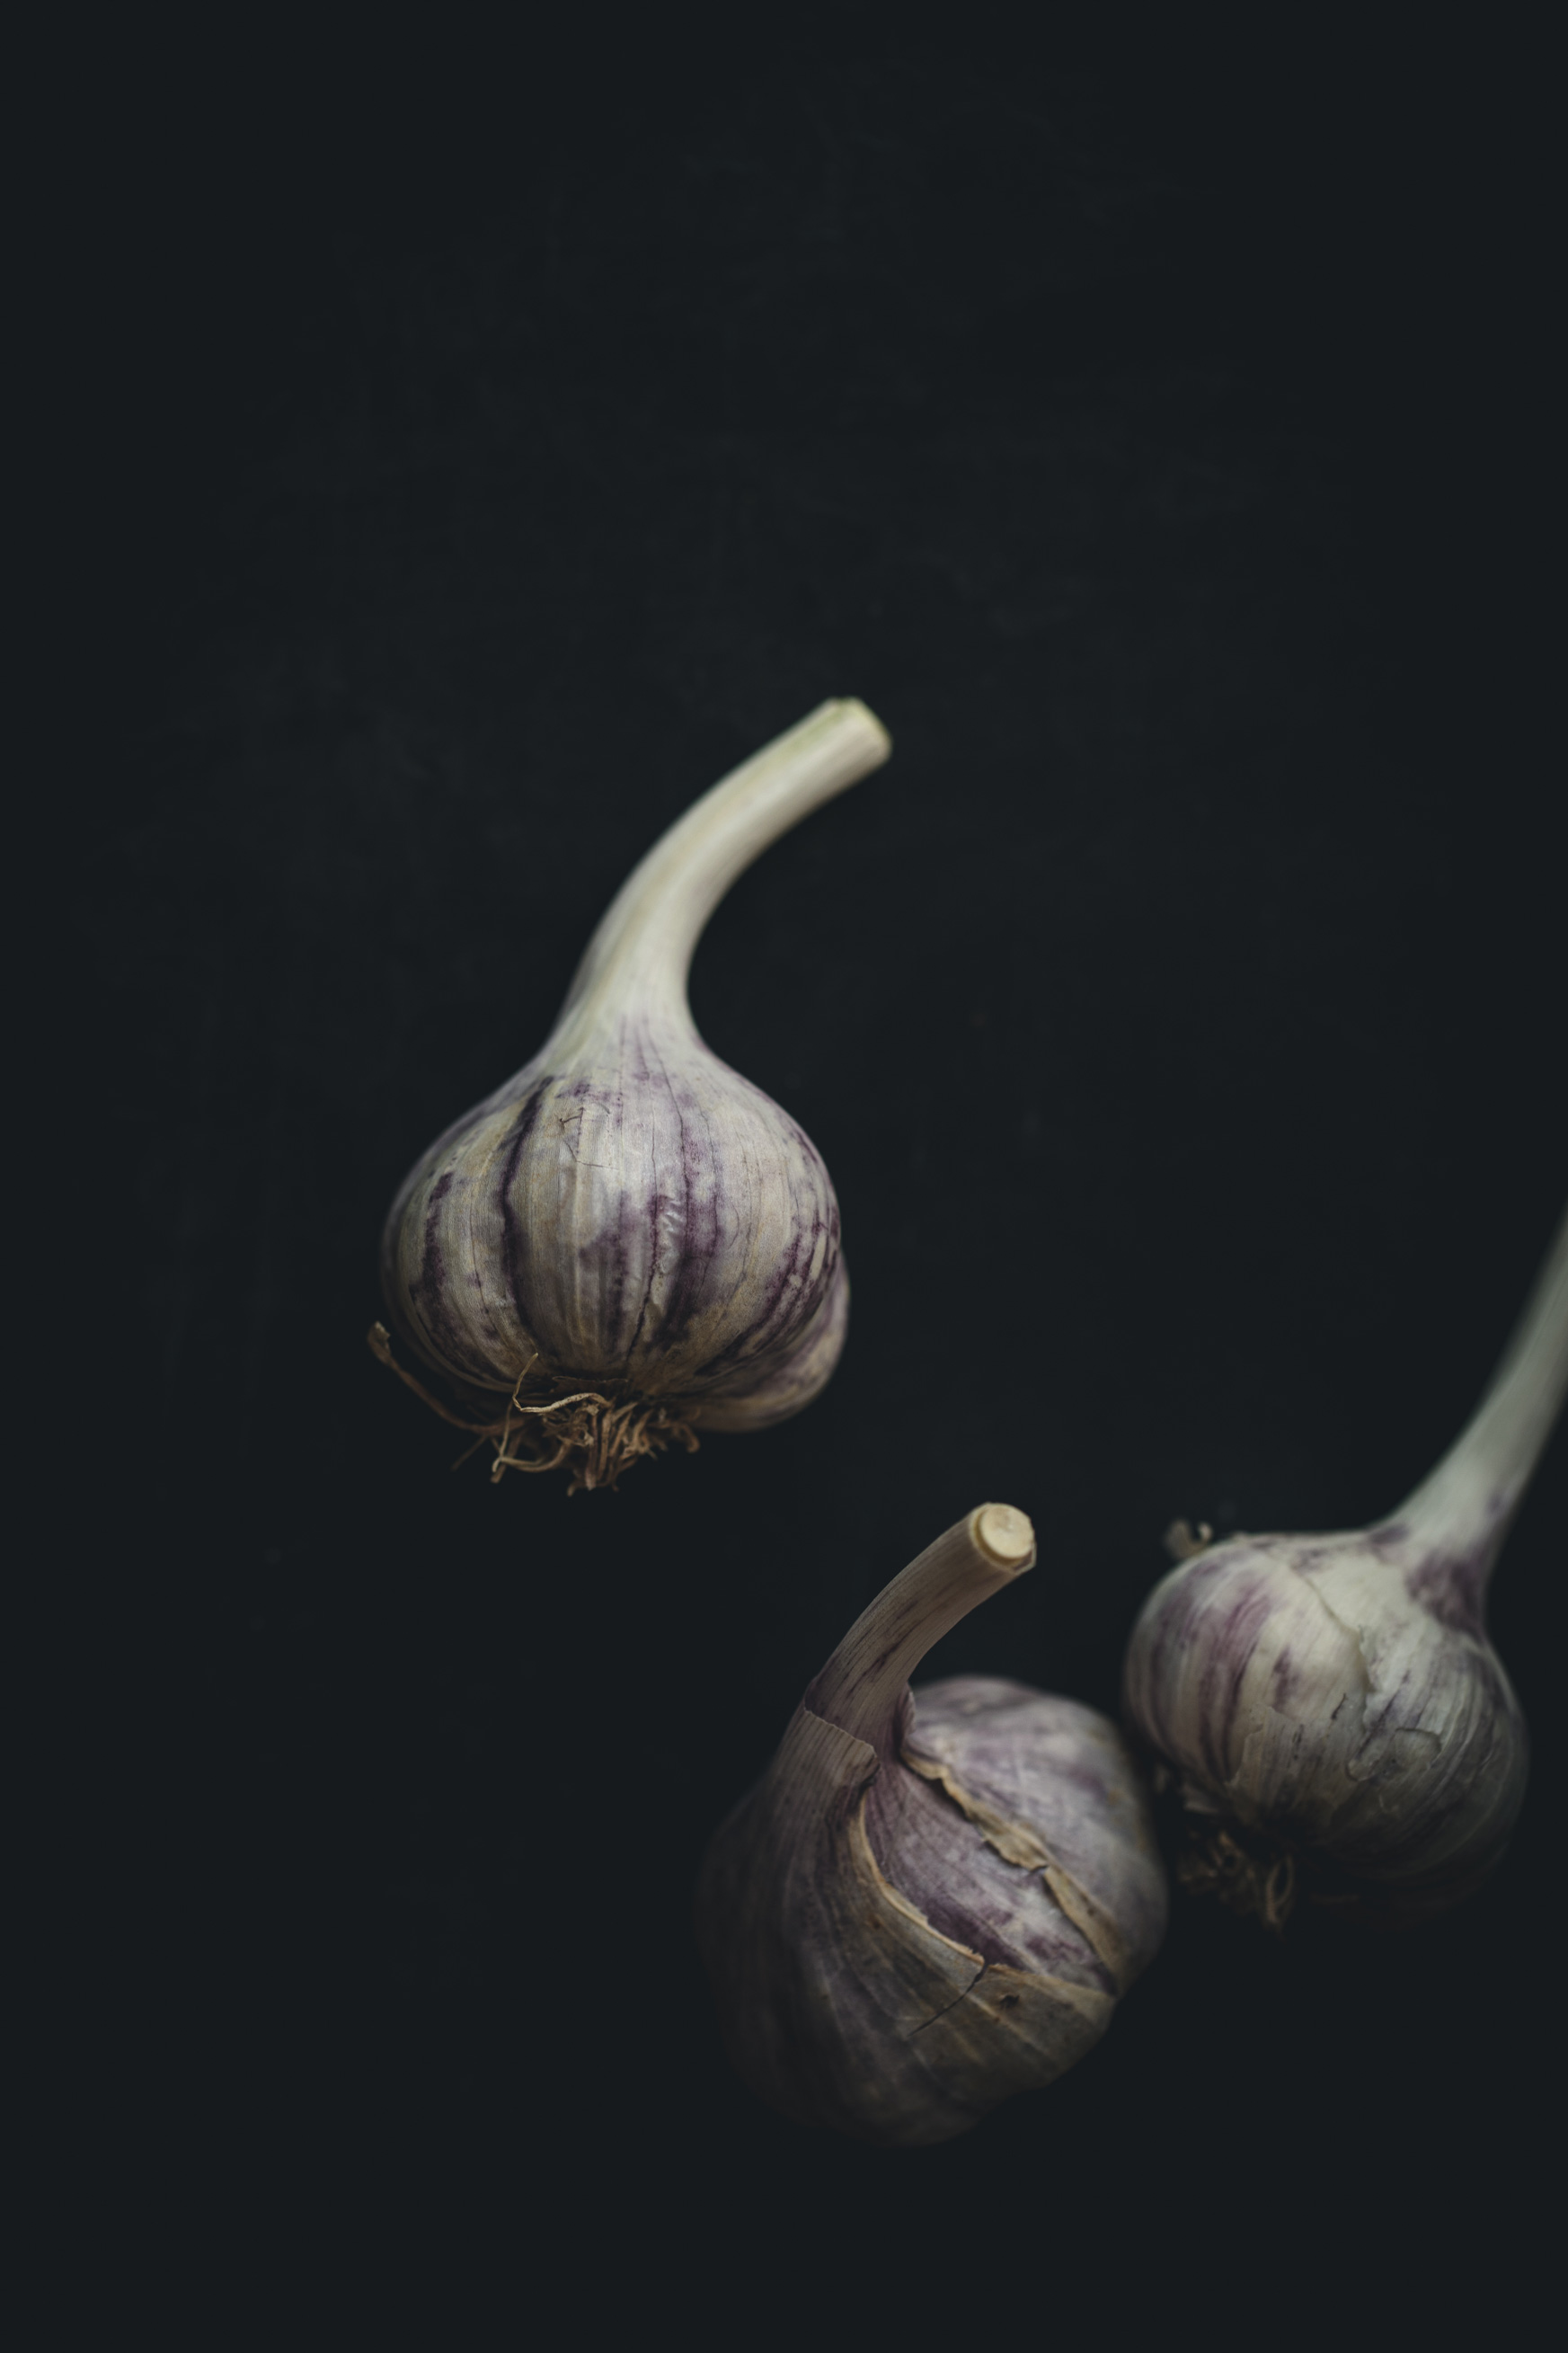 Garlic on a black background from the Moody Food series by John Robson Photography